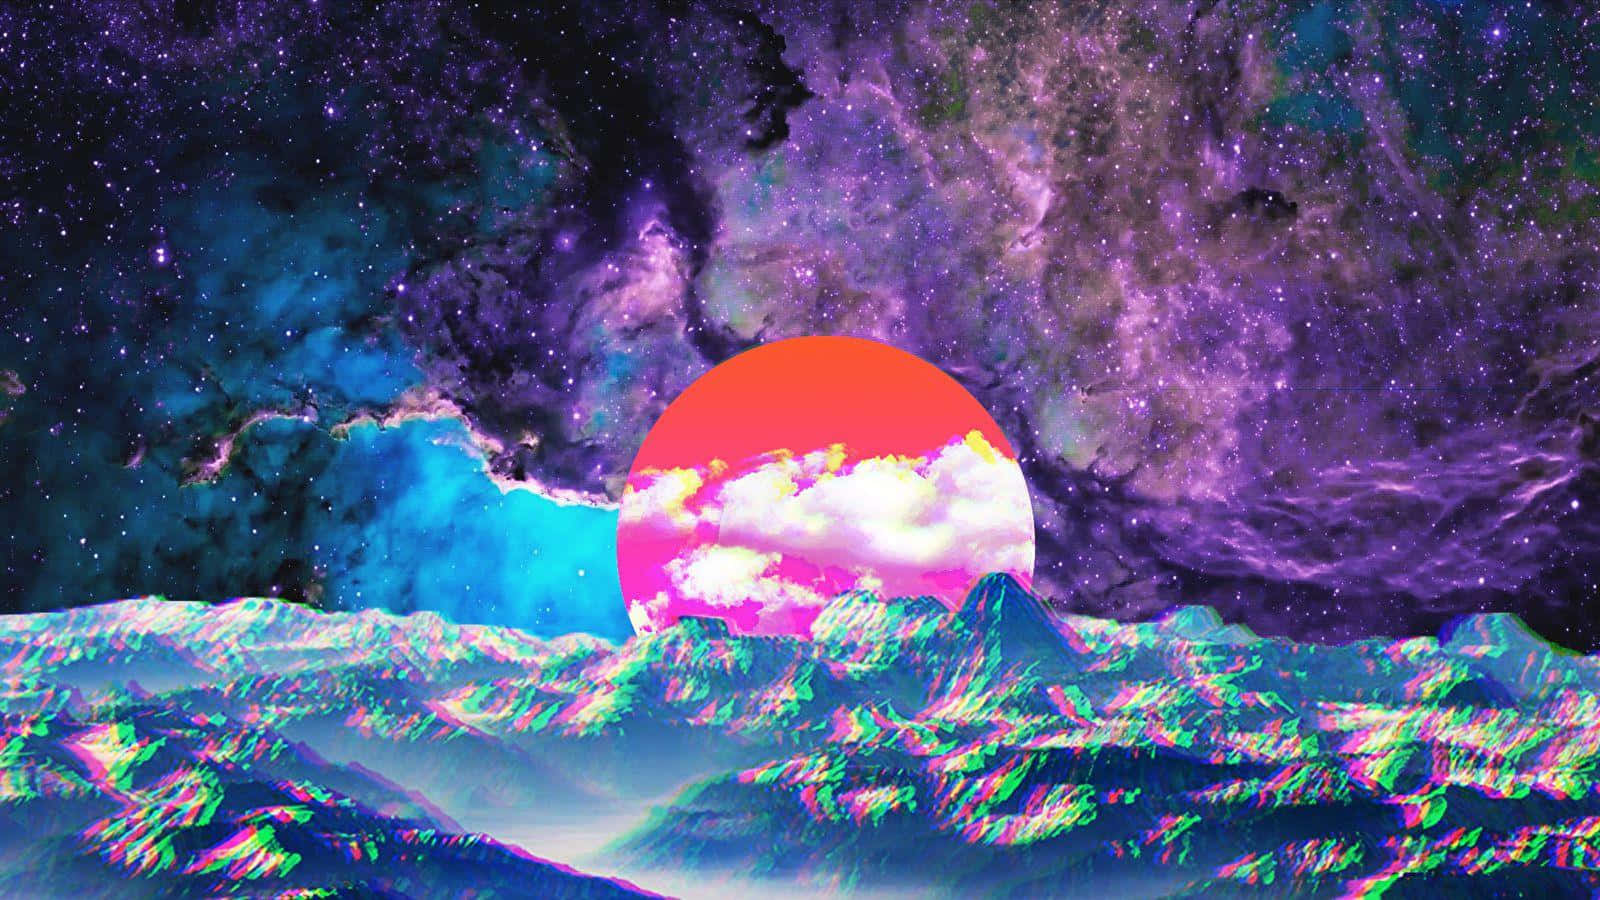 Vintage Trippy Retro Aesthetic Sunset With Clouds Wallpaper